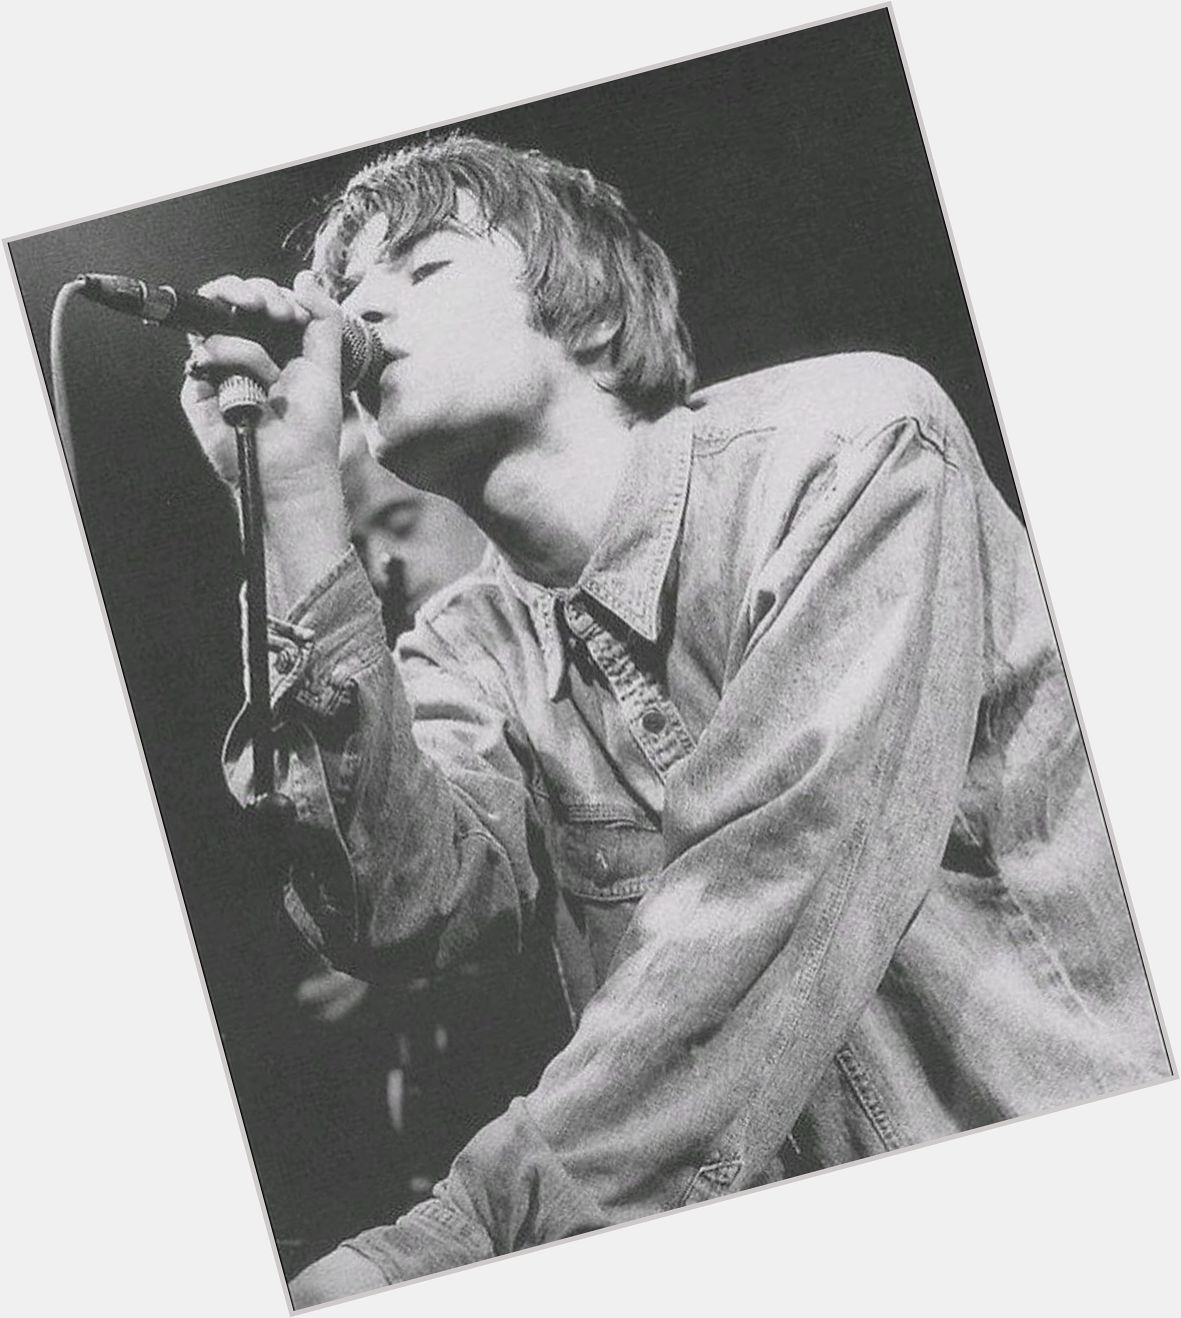 Happy 48th birthday to Liam Gallagher - lead singer of Oasis from 1991 to 2009.   